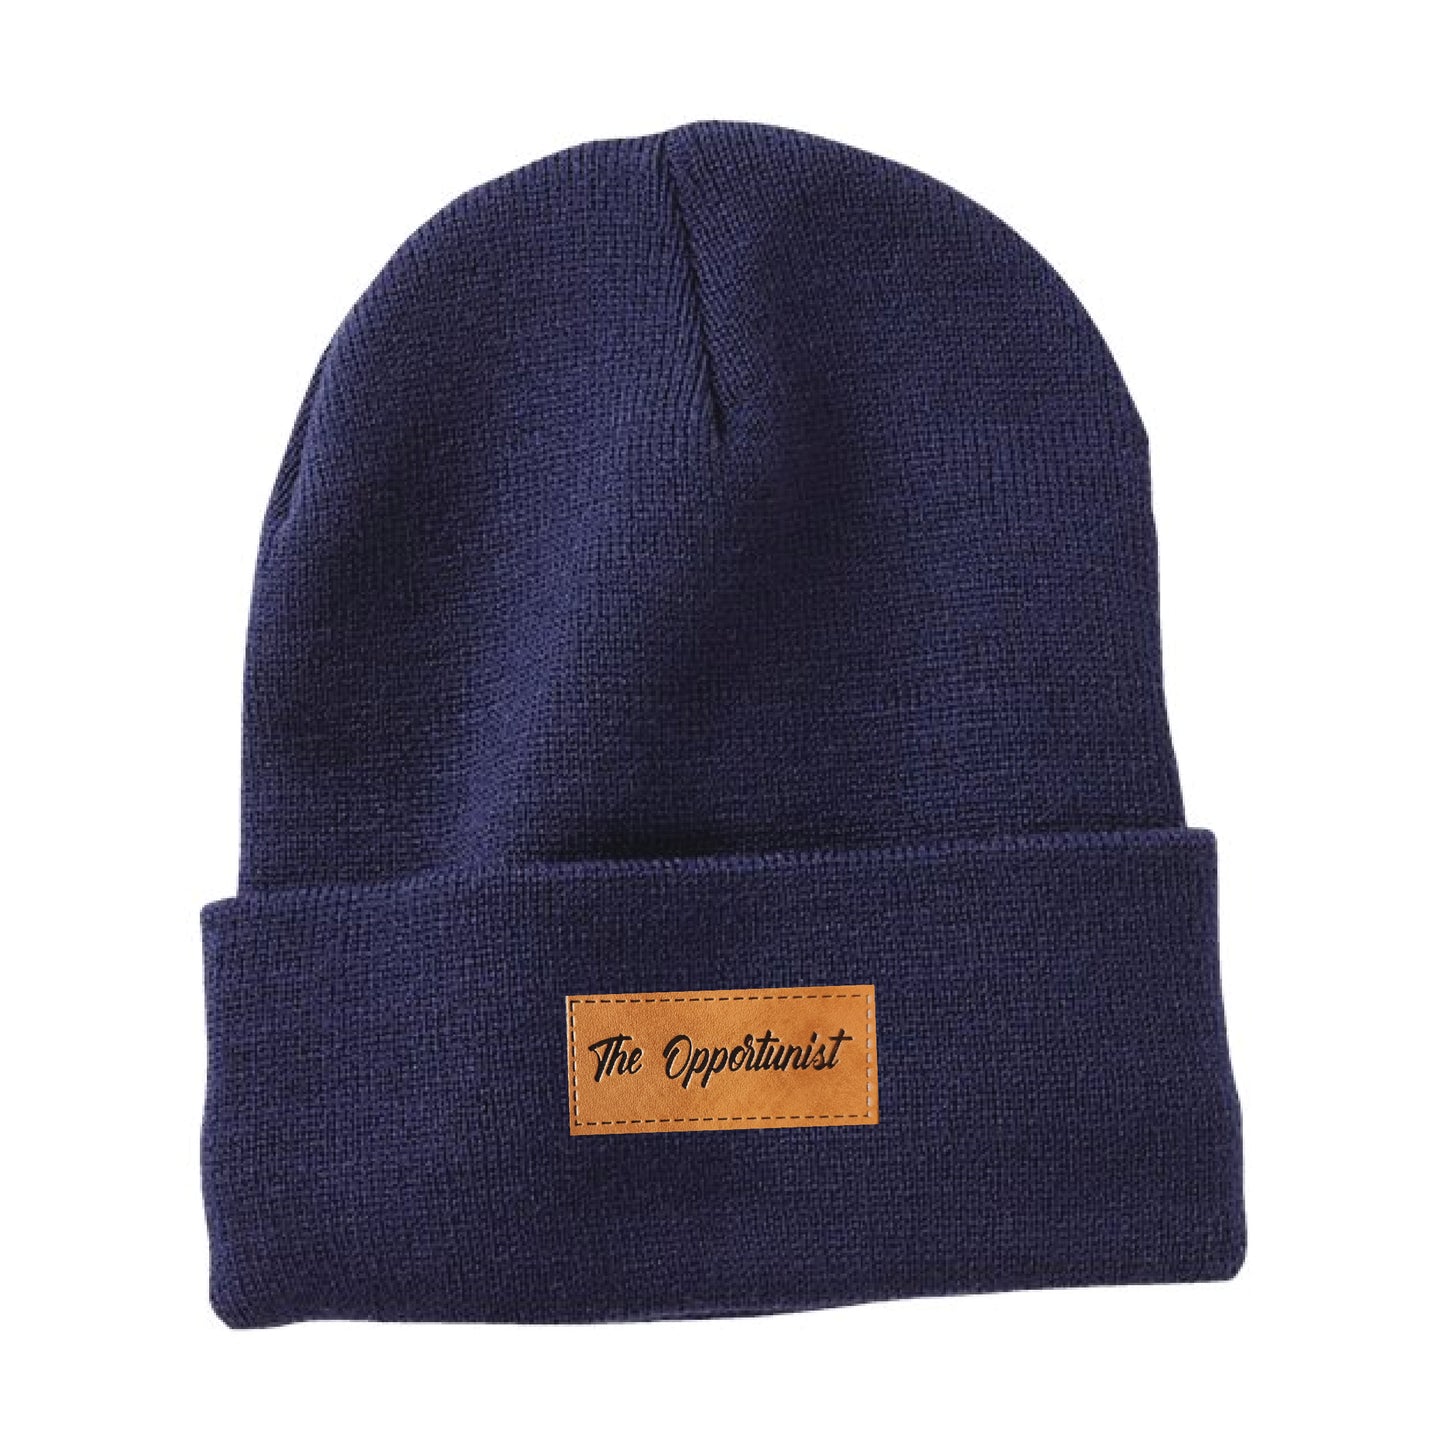 Opportunist Leather Patch on a Sherpa Lined Navy Beanie